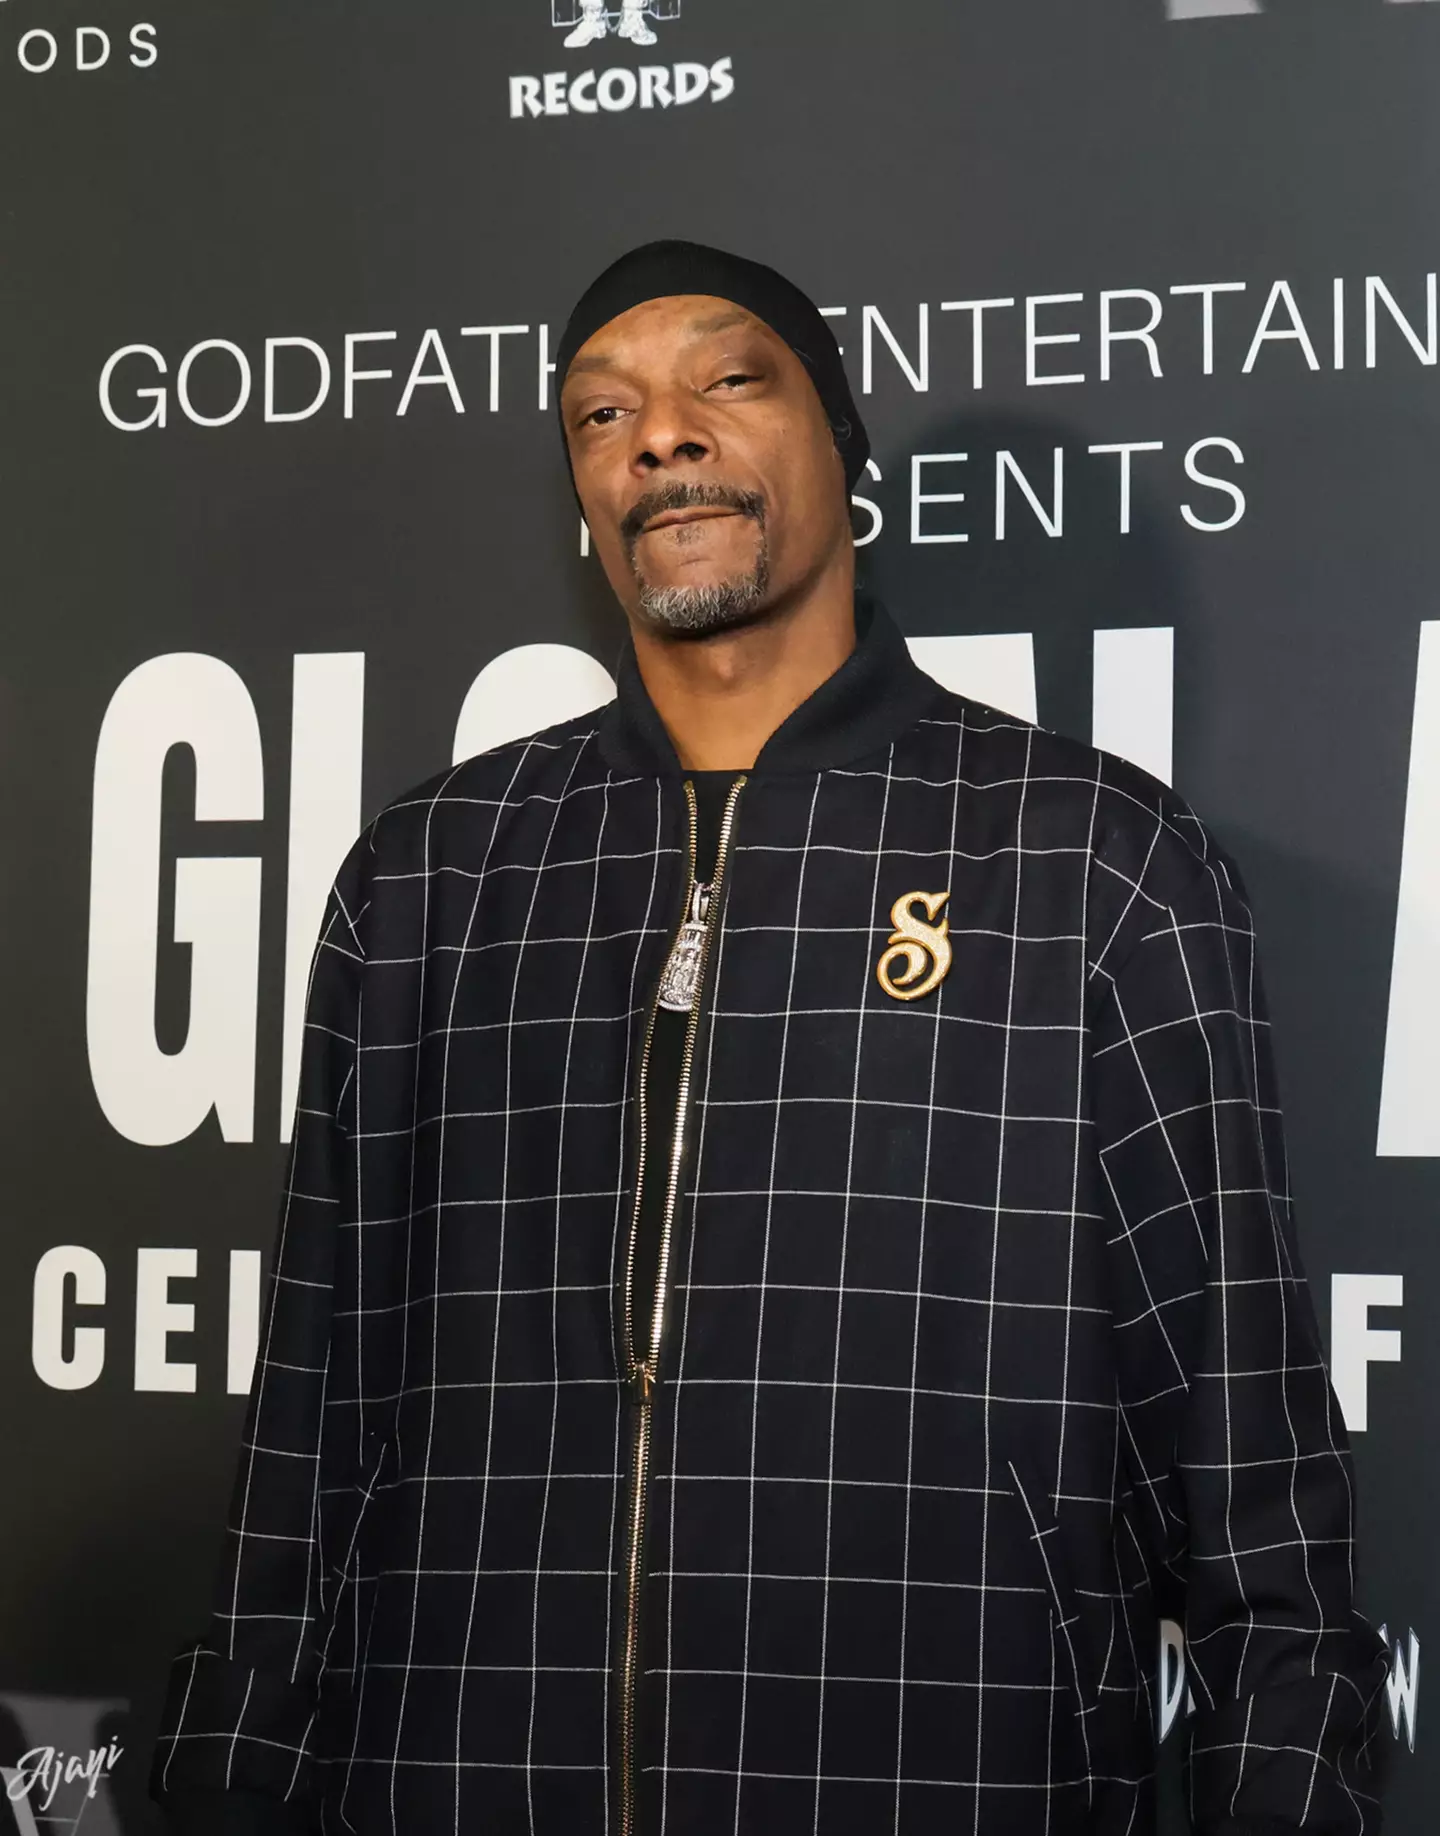 Snoop Dogg has gotten 16 Grammy nominations over the course of his career.